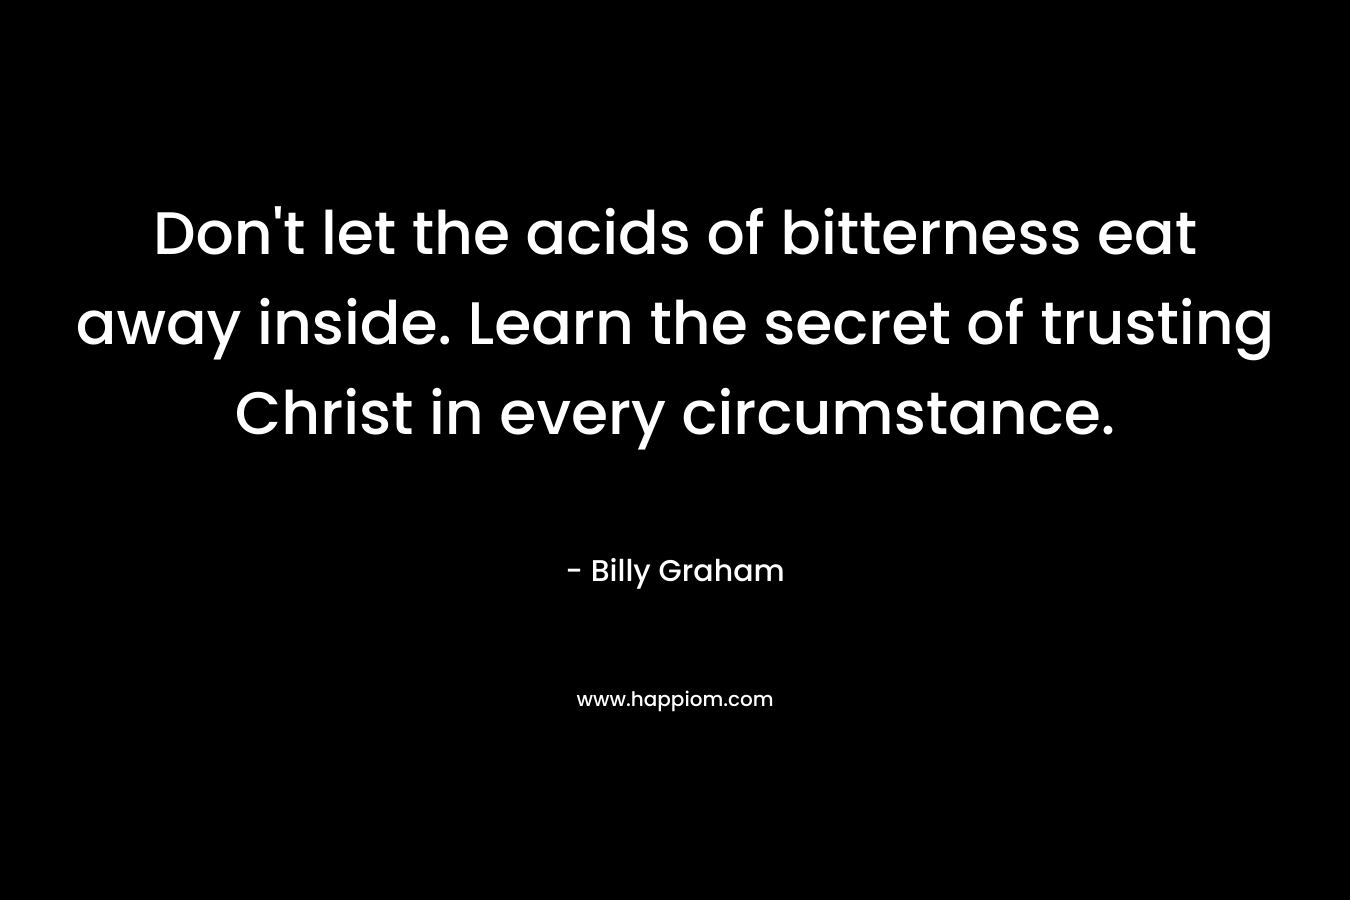 Don't let the acids of bitterness eat away inside. Learn the secret of trusting Christ in every circumstance.